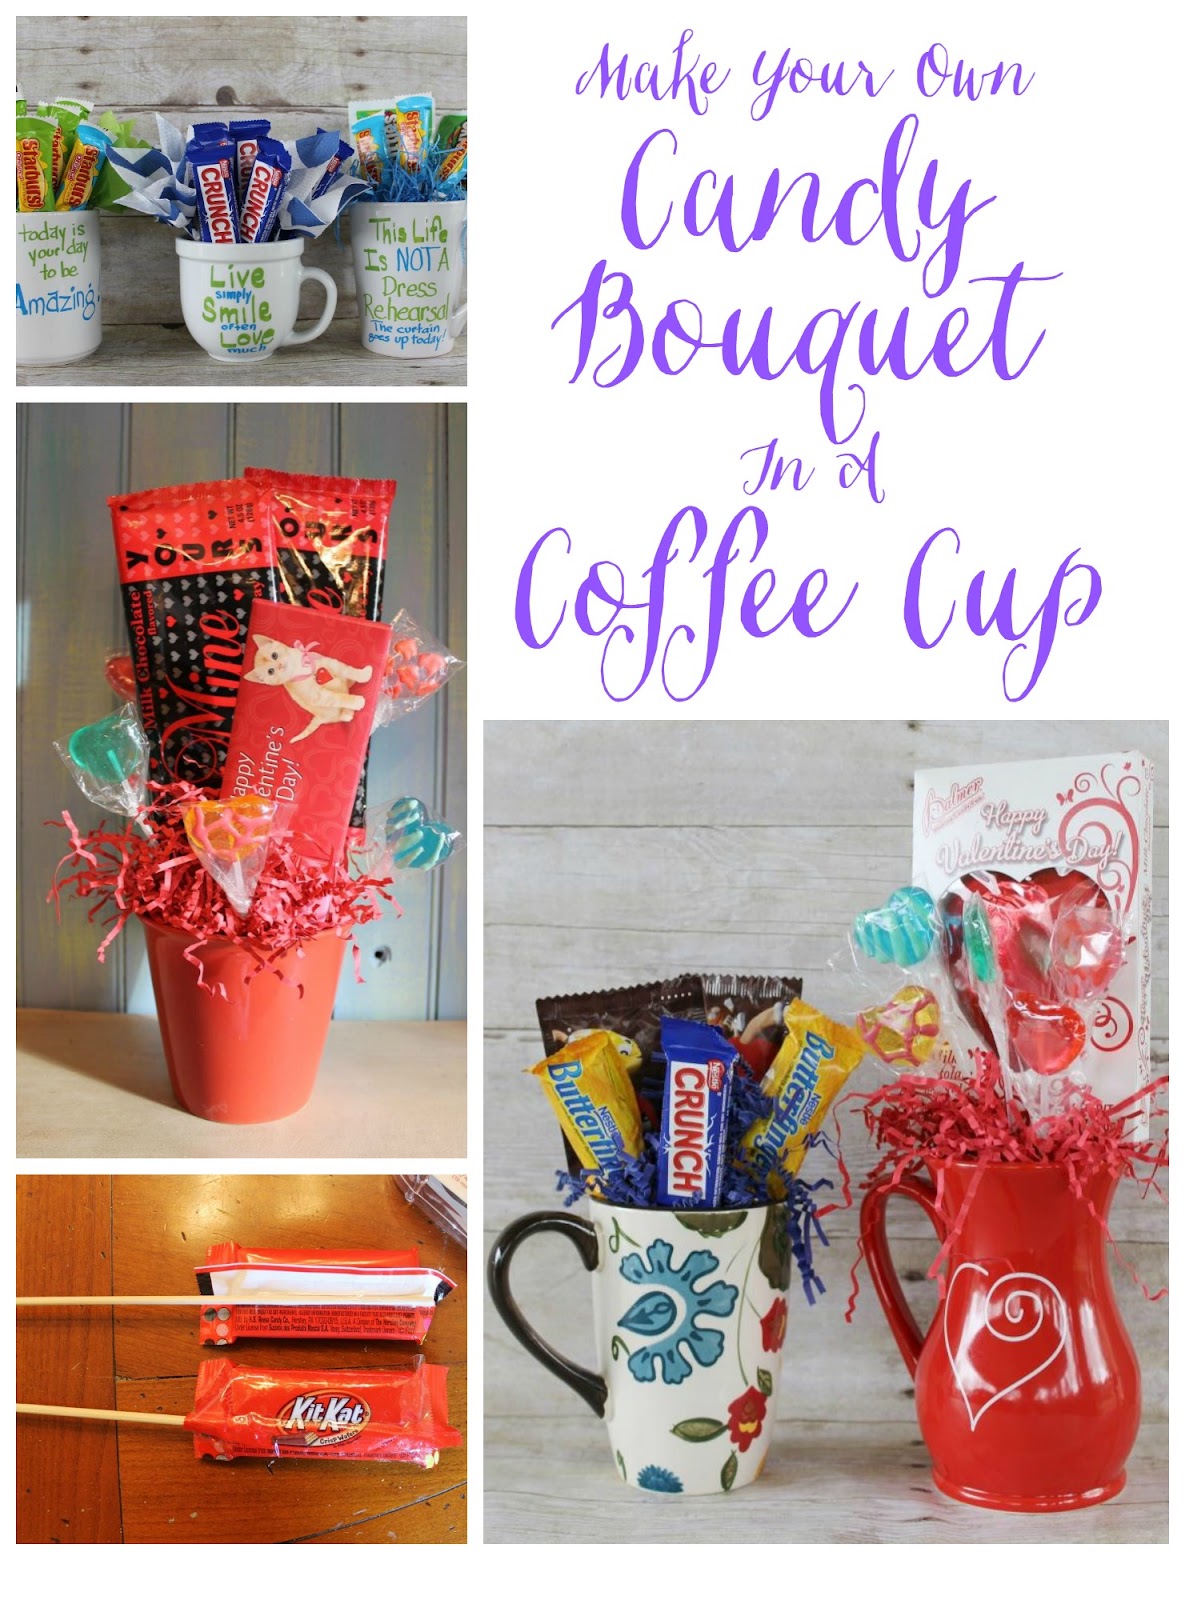 Decorate Mugs with These Fun and Easy Ideas! - DIY Candy